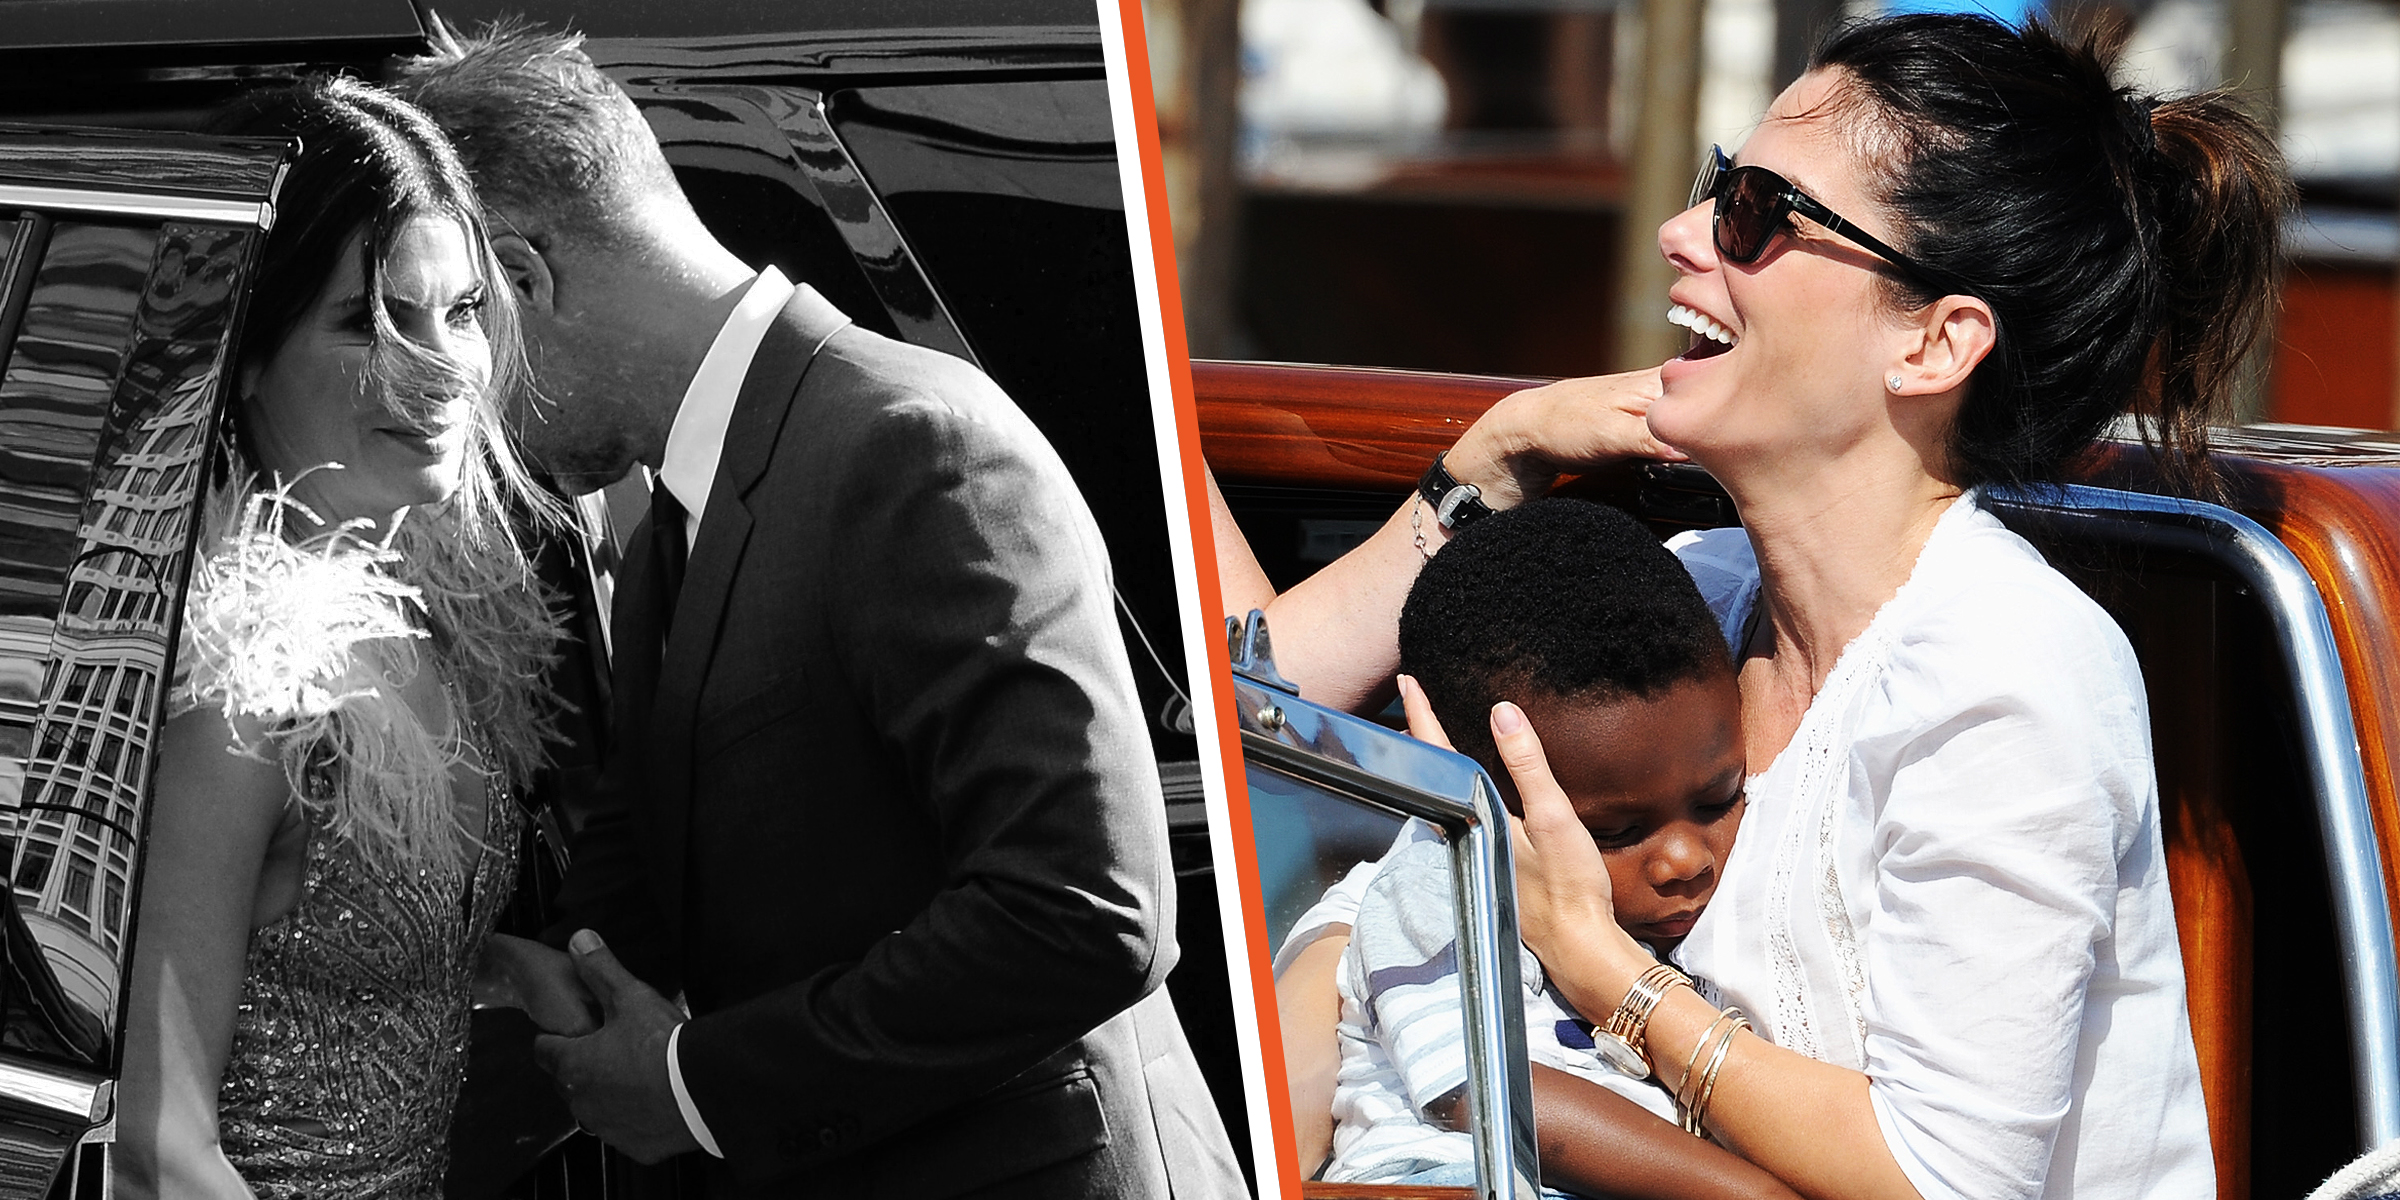 Sandra Bullock and Bryan Randall [Left]; Sandra Bullock and her son Louis [Right] | Source: Getty Images